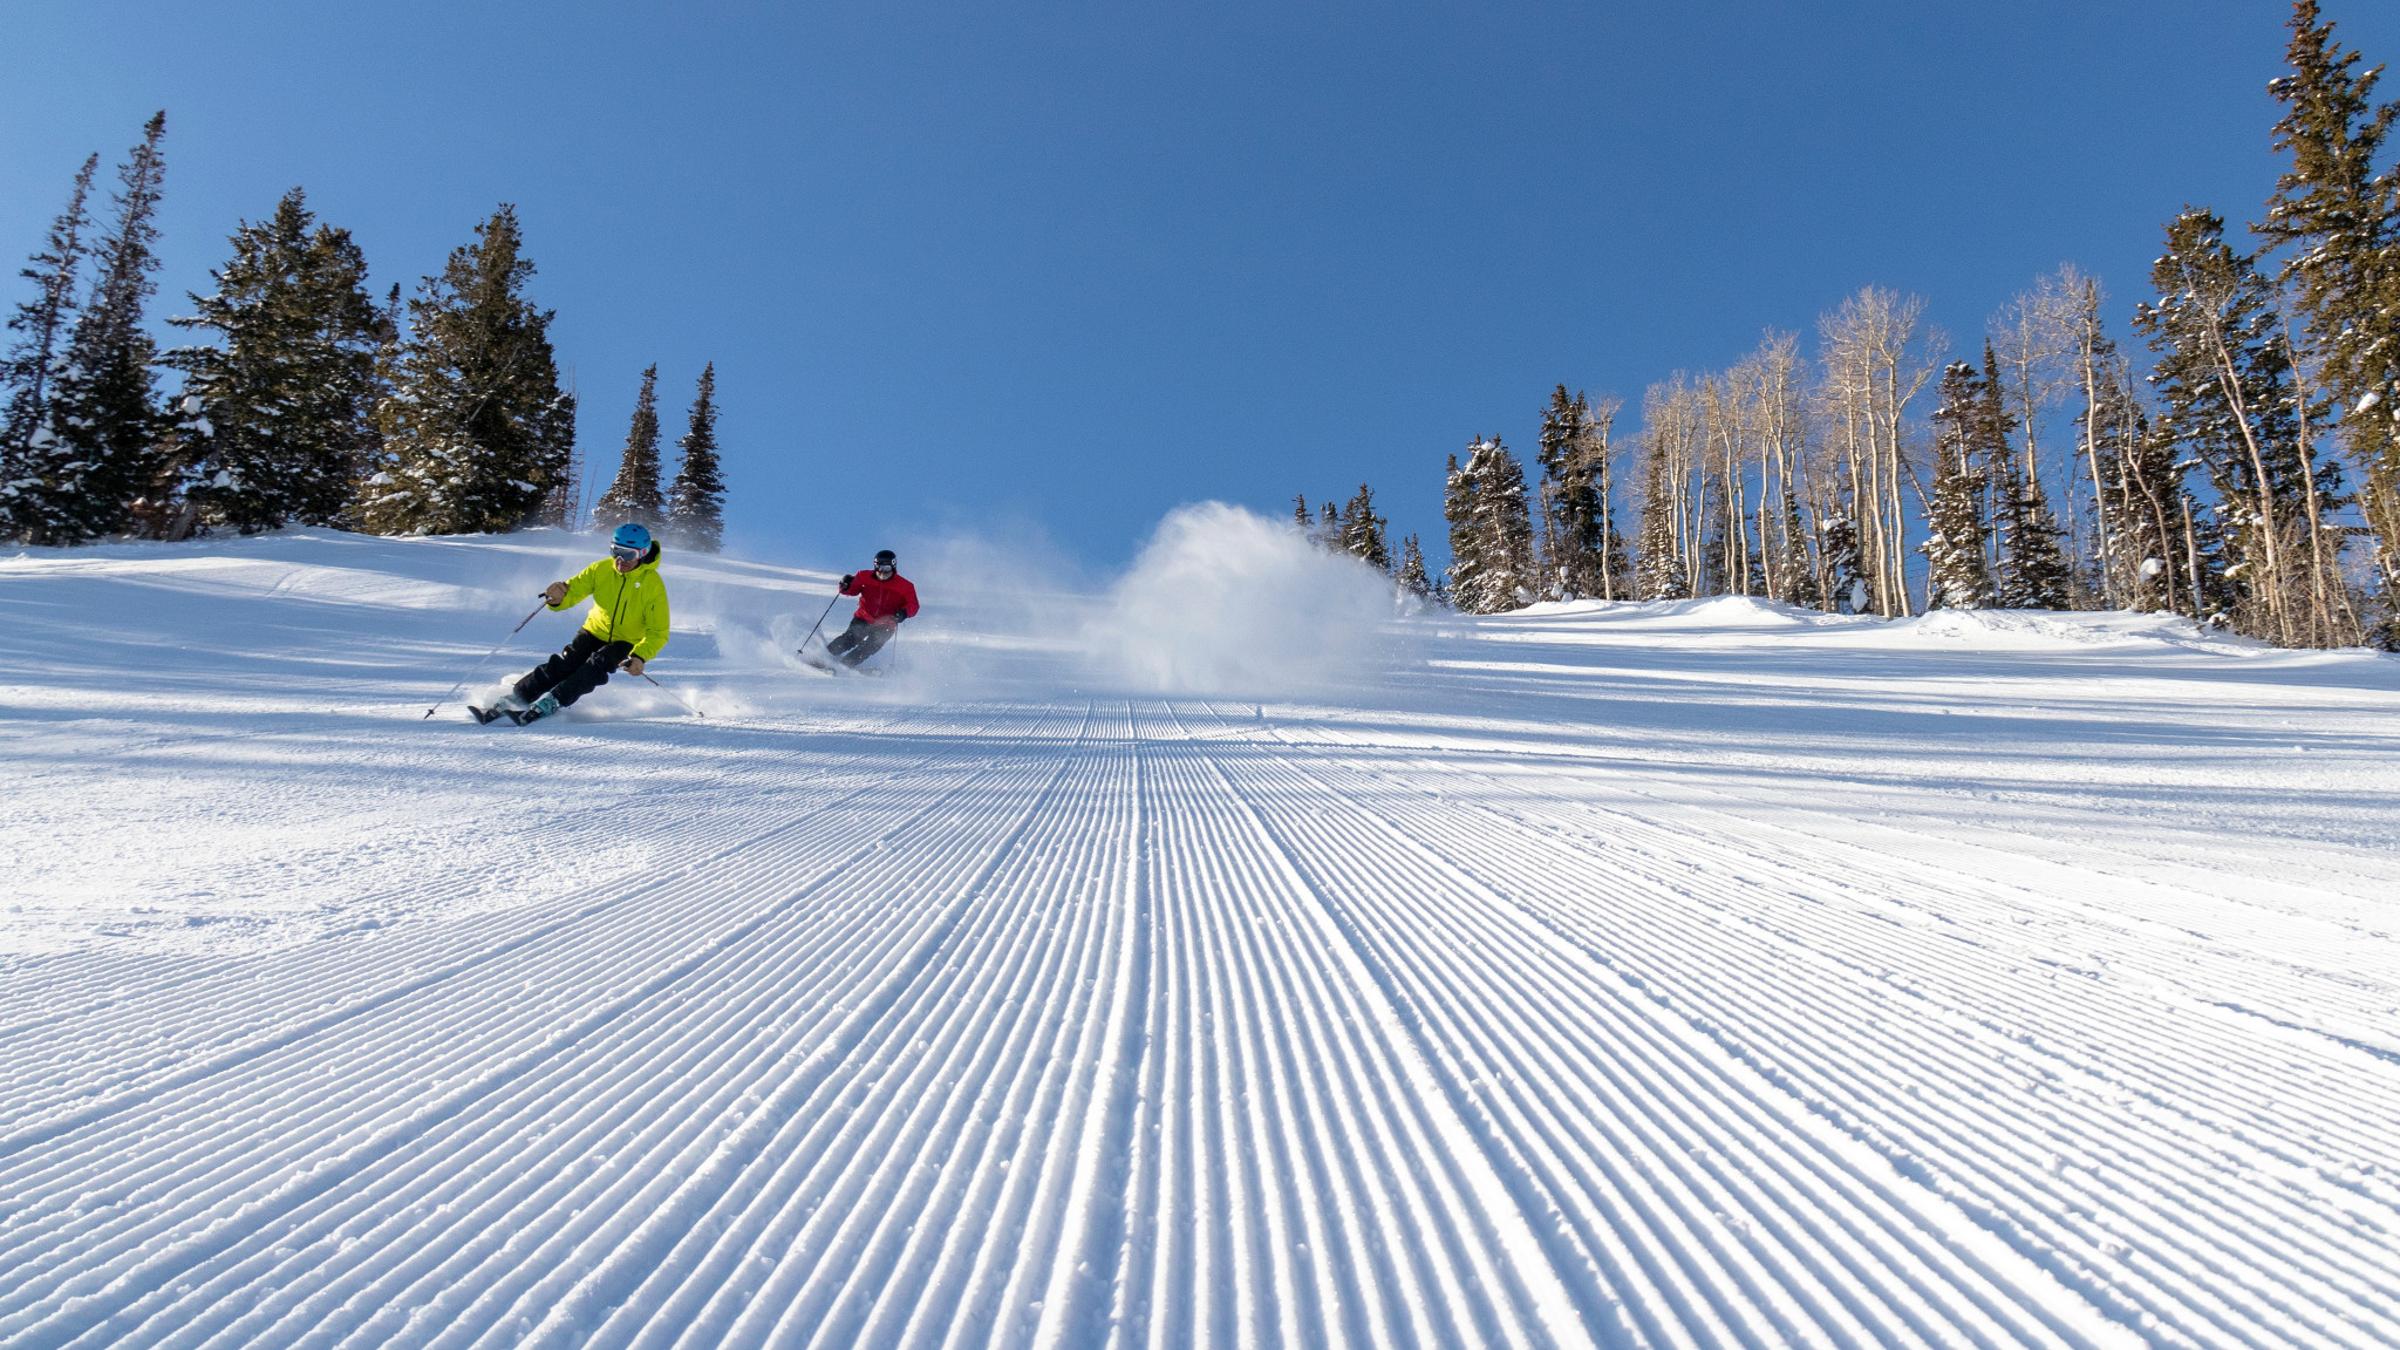 Two guests skiing a groomed run at Deer Valley Resort